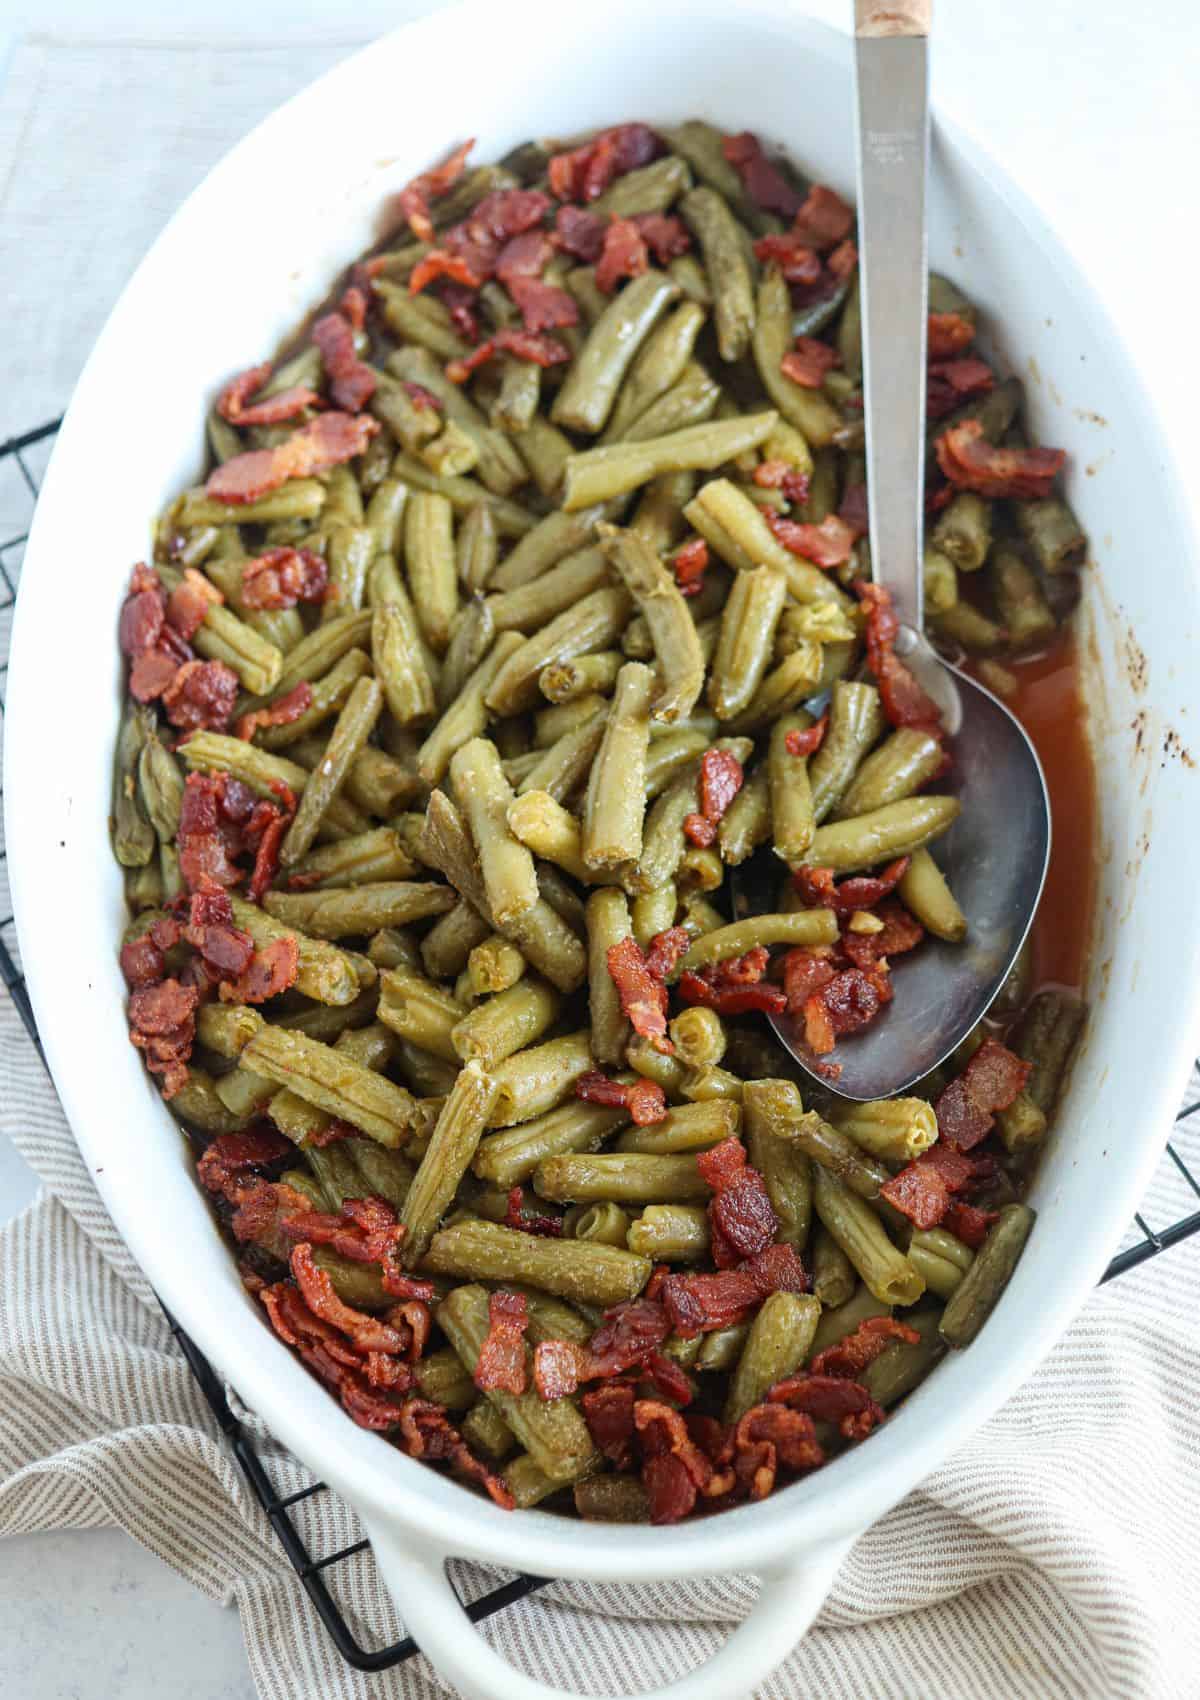 green beans with bacon in an oval casserole dish.